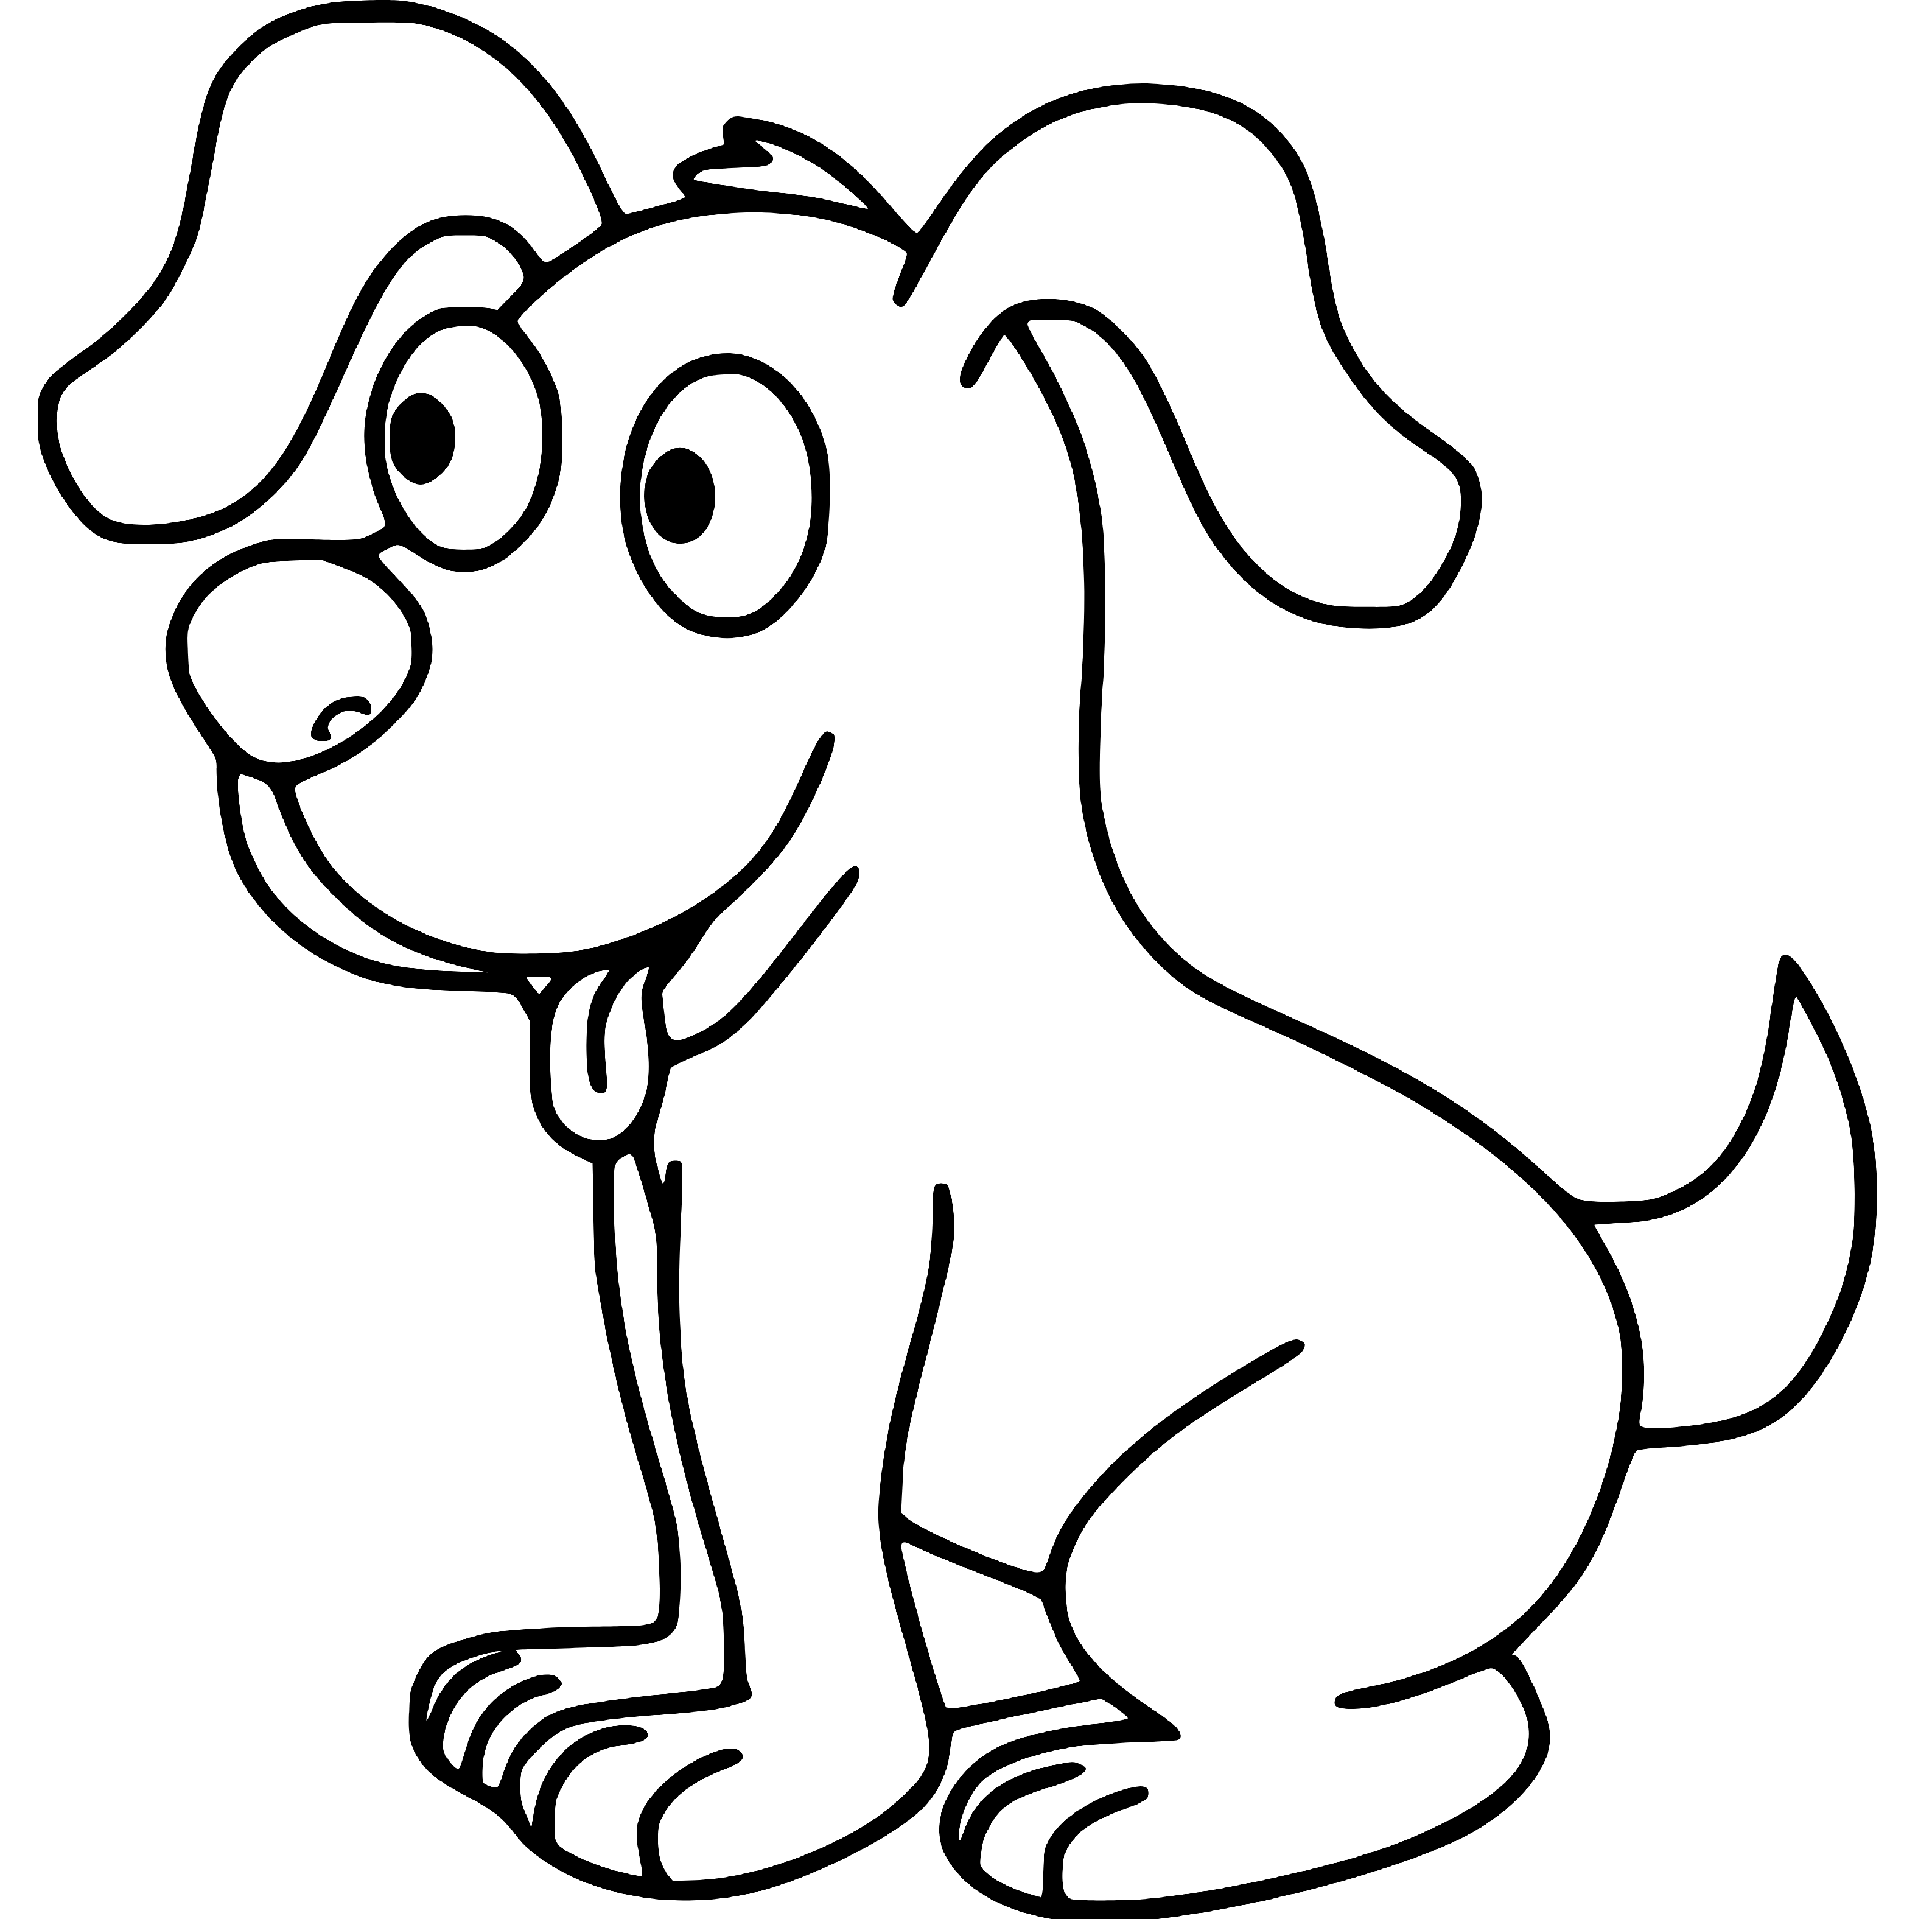 Puppy Tongue out Coloring Page for Kids - SheetalColor.com